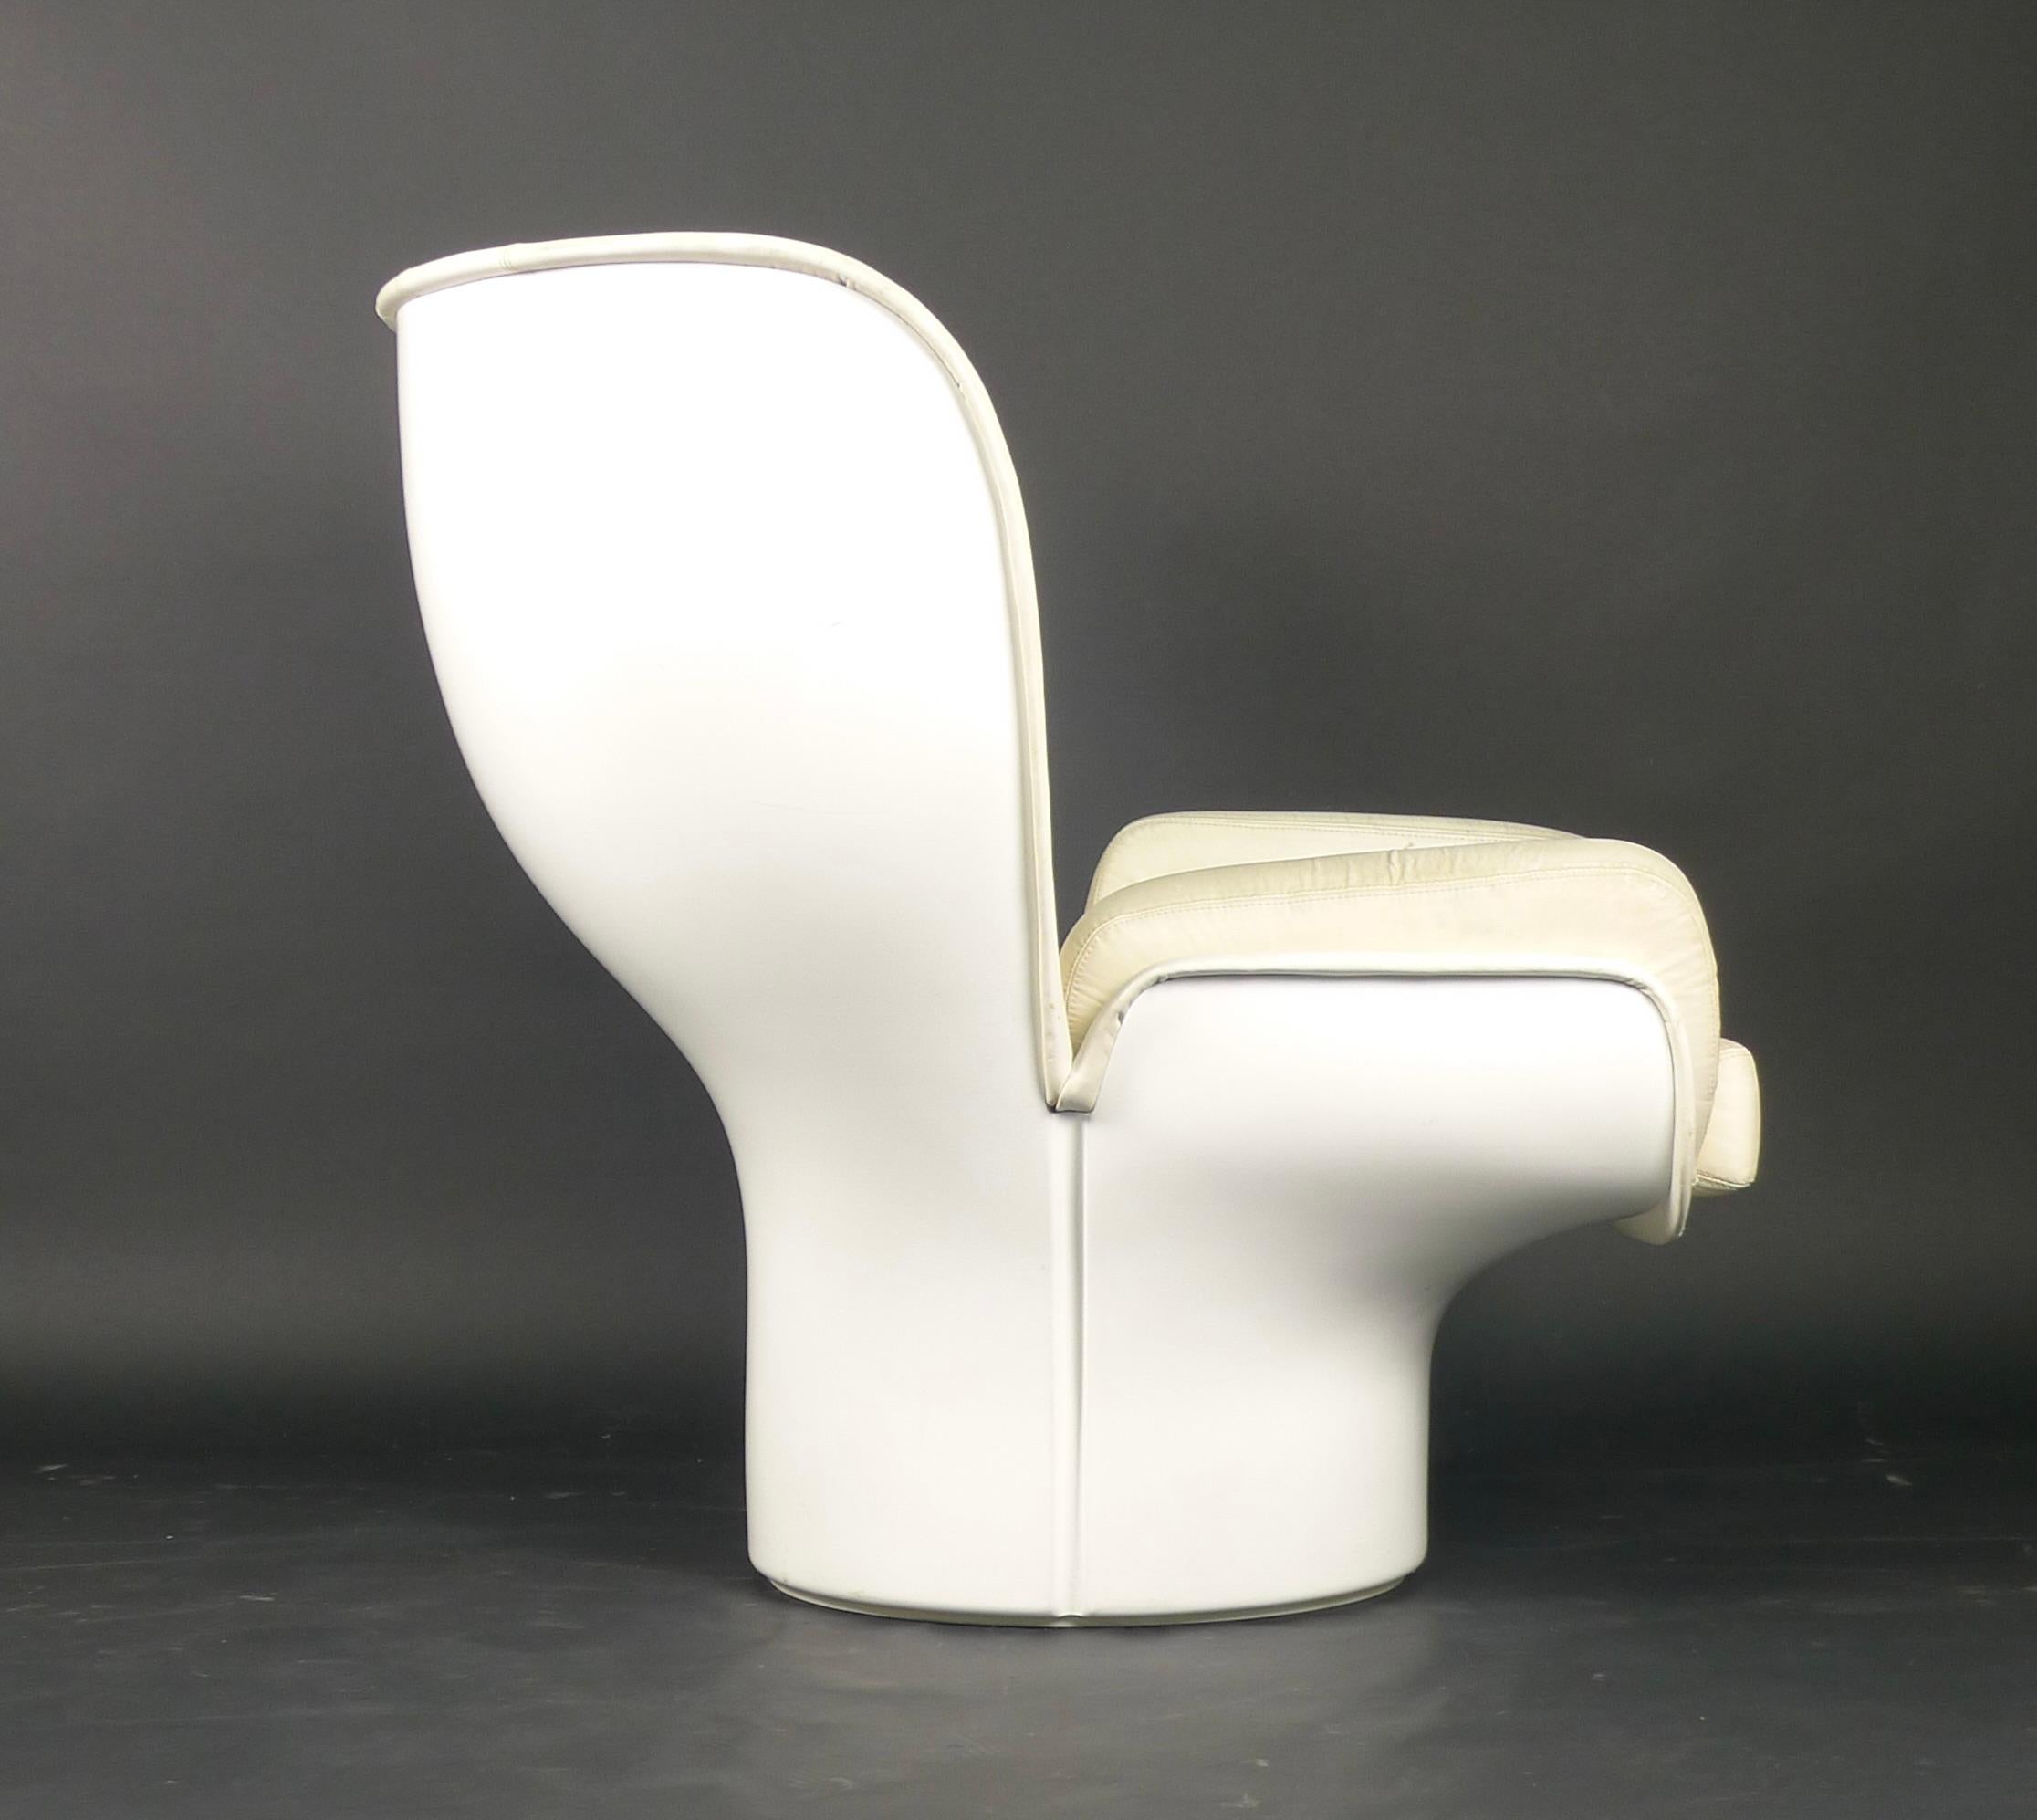 Joe Colombo 'Elda' Lounge Chair, White Leather and Fibreglass, by Comfort, Italy 2